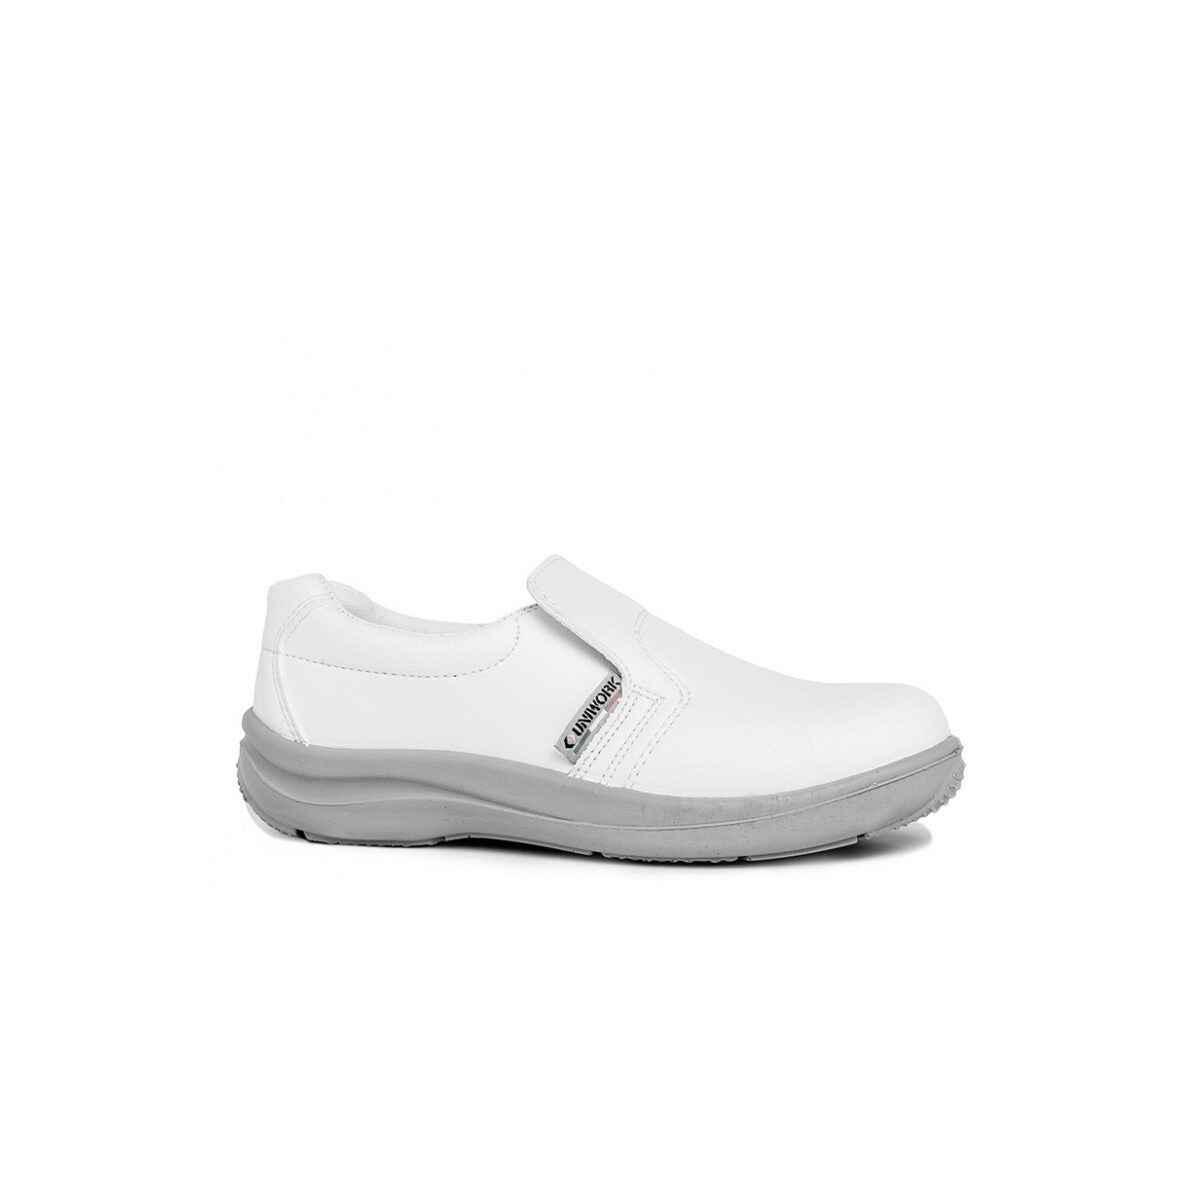 CHAUSSURE SECURIT MIXTE  BLANC TAILLE 35